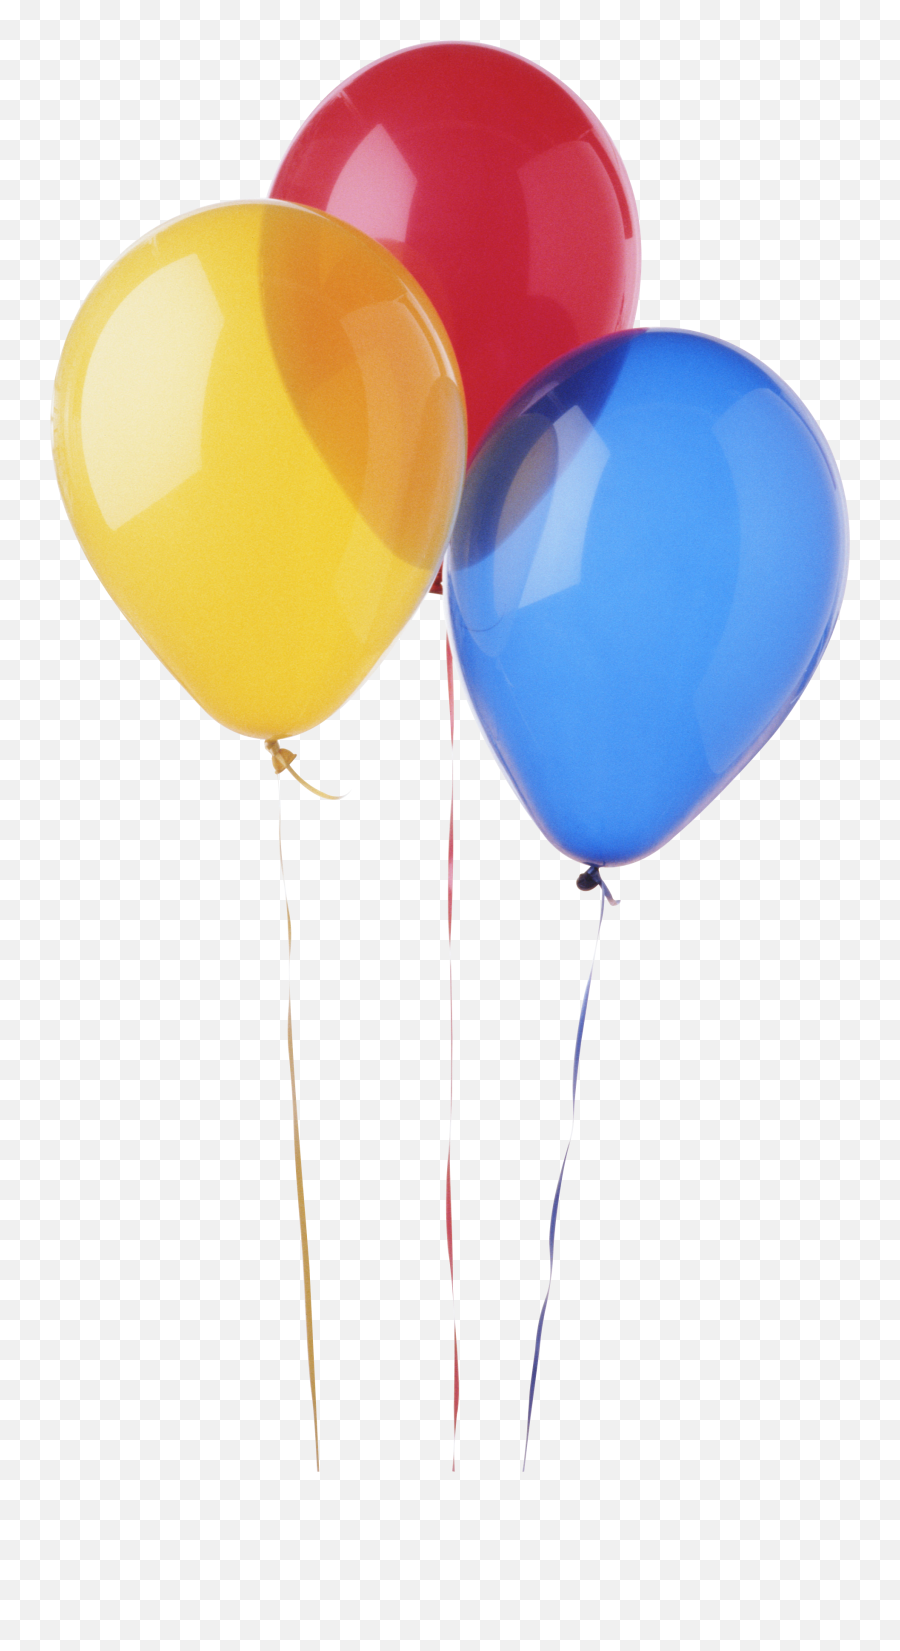 Free Png Images U0026 Vectors Graphics Psd Files - Dlpngcom Transparent Background Balloon Png,Up Balloons Png